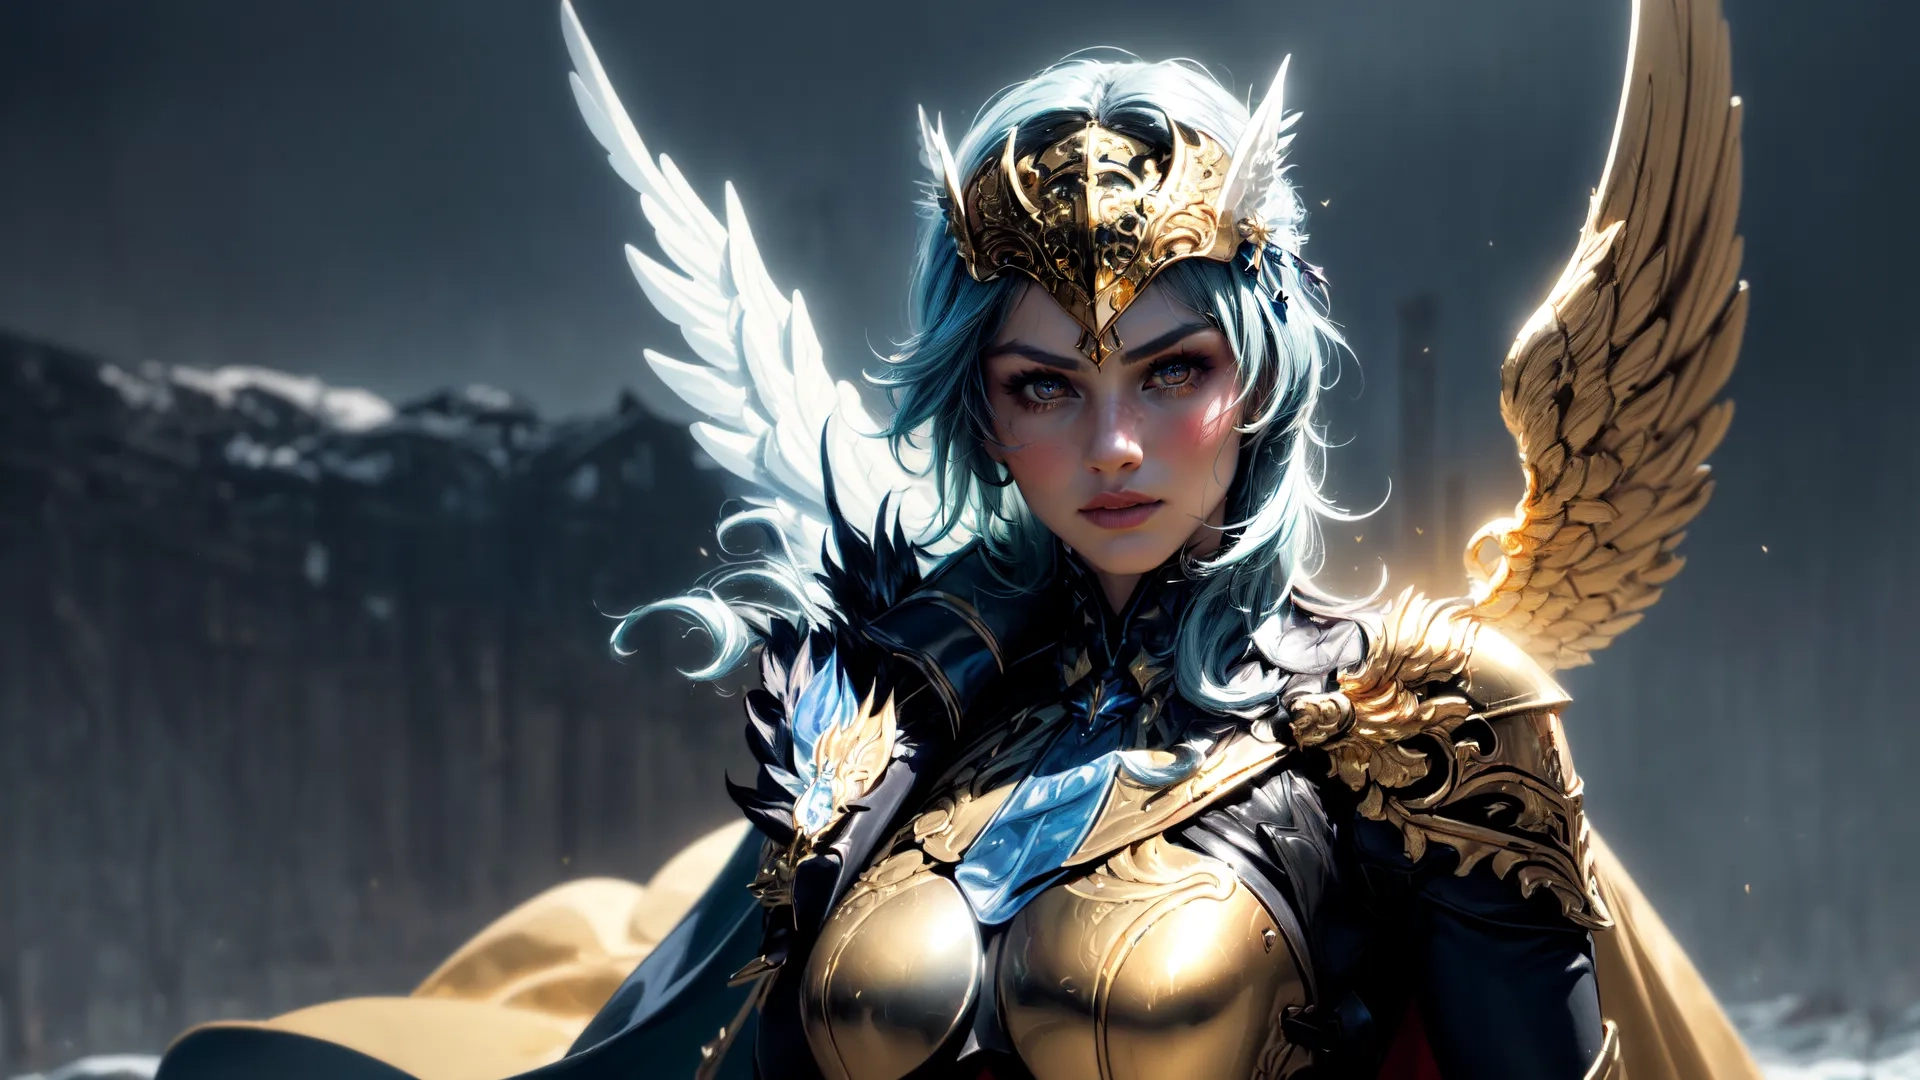 angel with dark hair, wearing gold clothes and holding a sword on her hand and a large white eagle on her head next to the trees in the background
